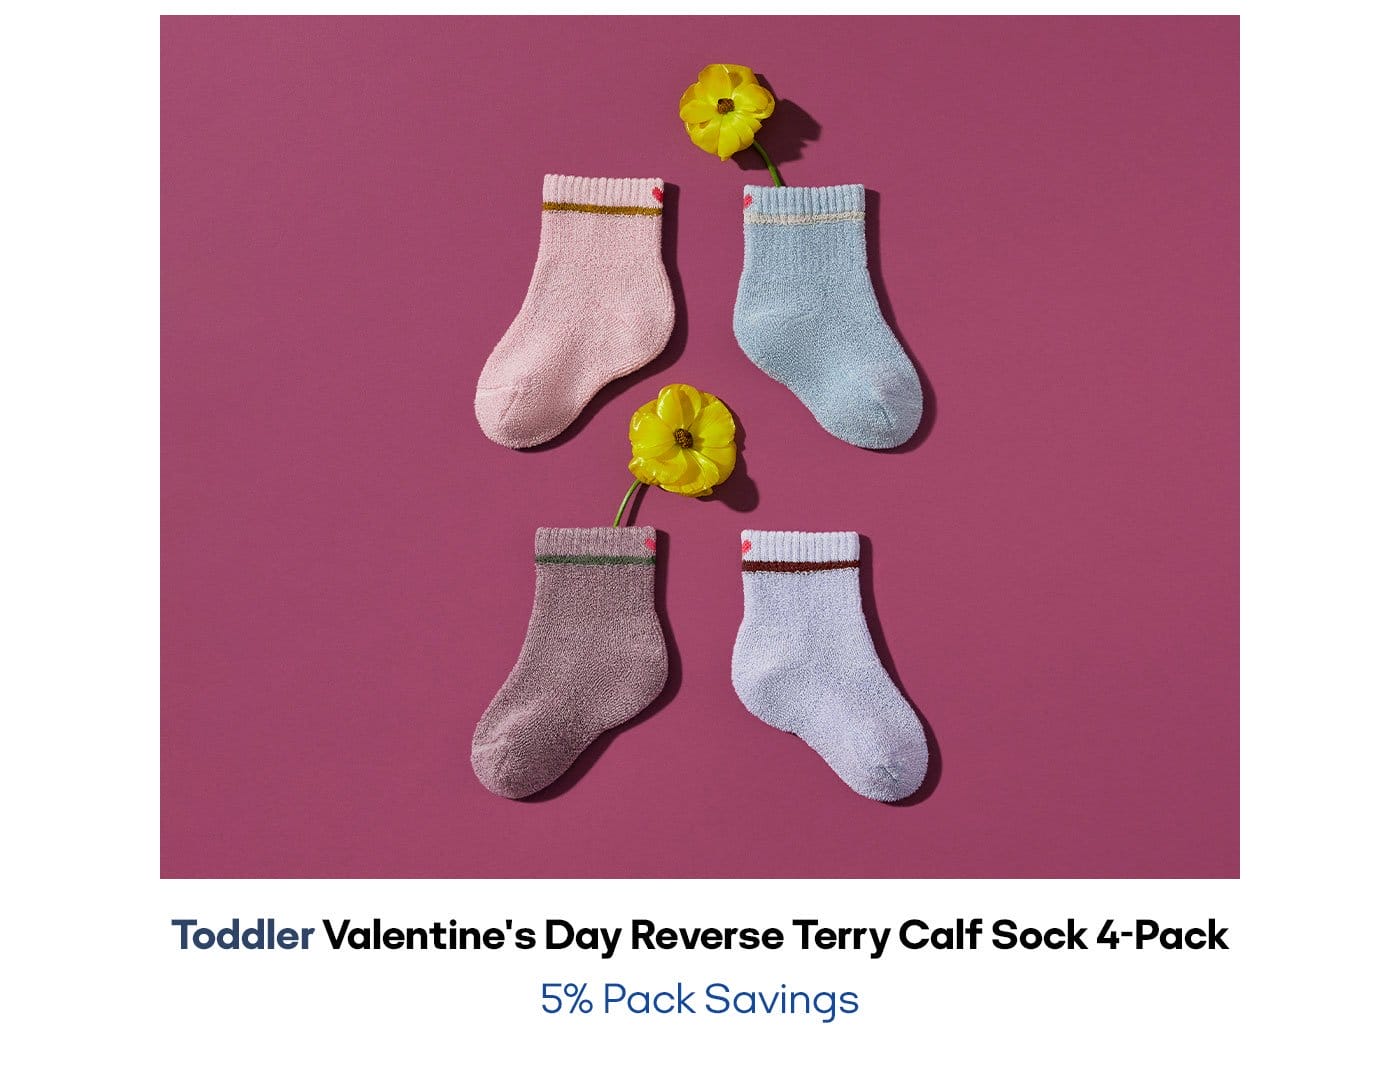 Toddler Valentine's Day Reverse Terry Calf Sock 4-Pack